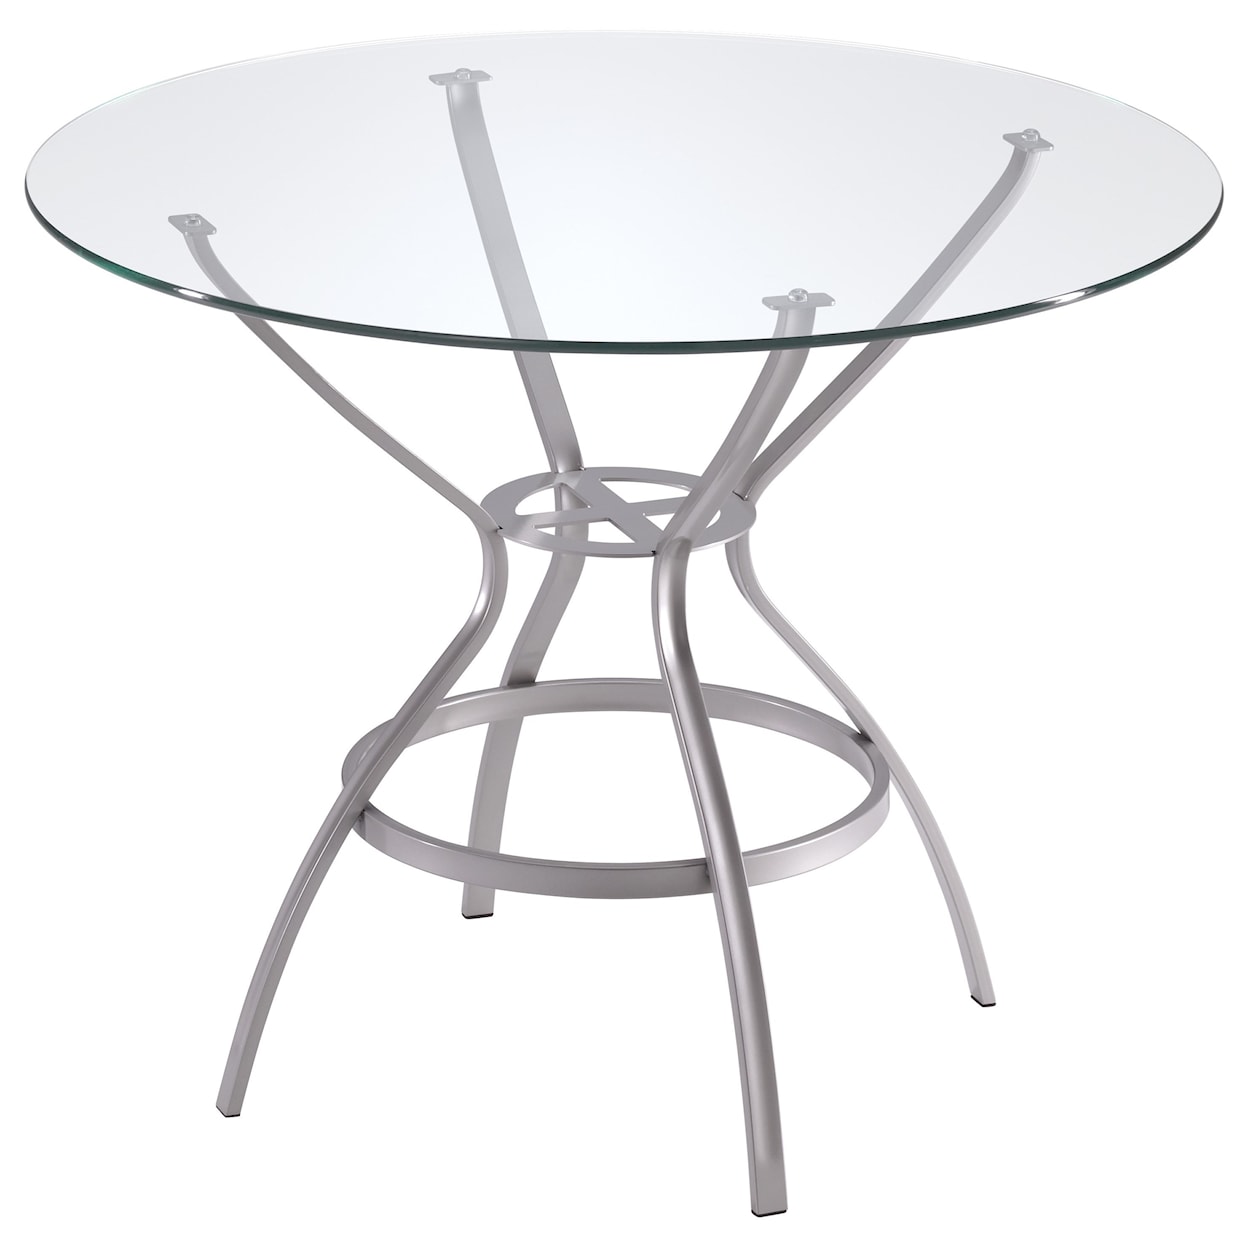 Trica Contemporary Tables Rome Round Table